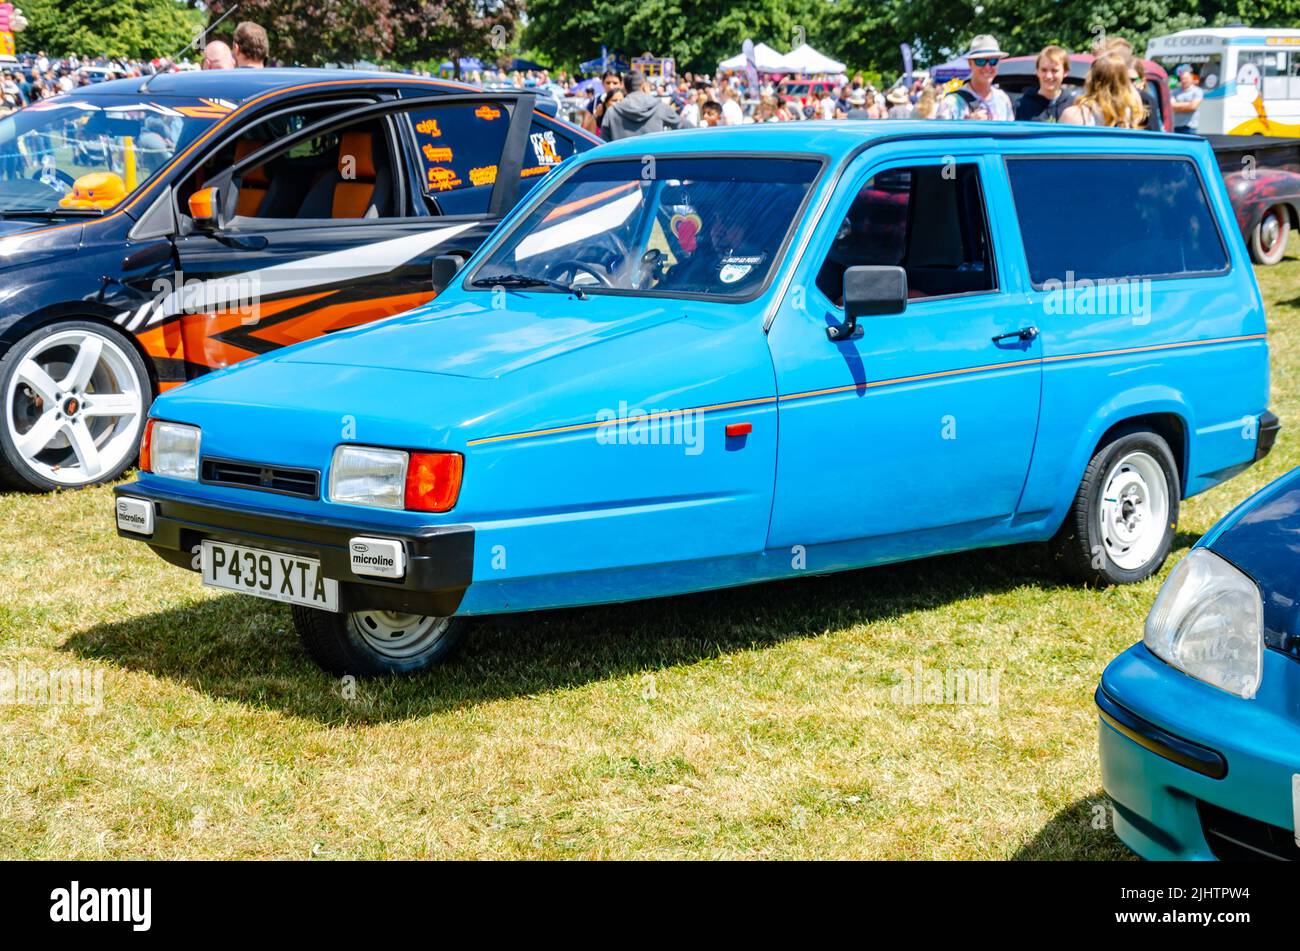 A 1996 Reliant Robin three wheeler car in blue at The Berkshire Motor Show in Reading, UK Stock Photo